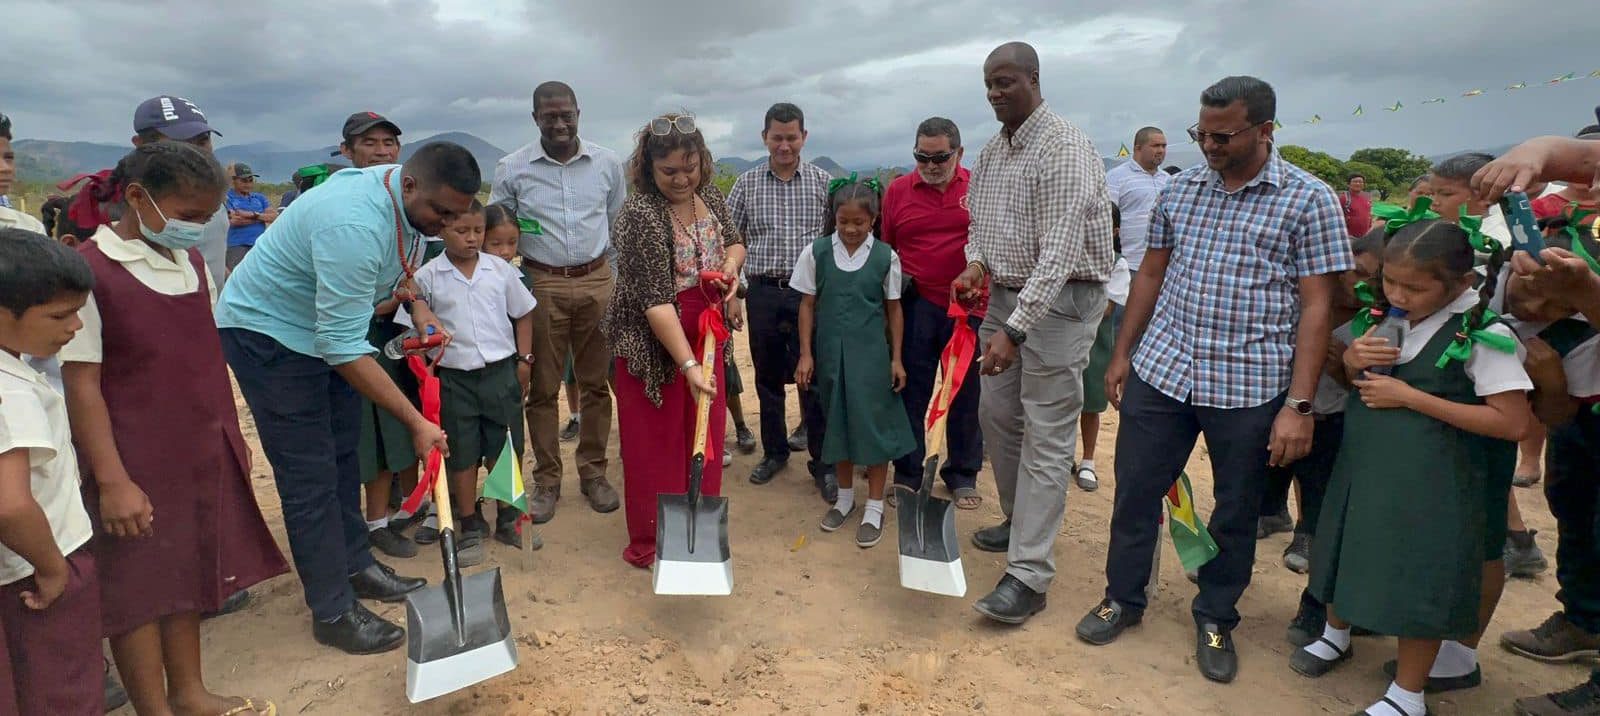 Minister of Education, Priya Manickchand alongside Minister of Local Government, Nigel Dharamall and the Ministry’s Permanent Secretary, Alfred King turning the sod for the construction of the secondary school at Karasabai on Tuesday.